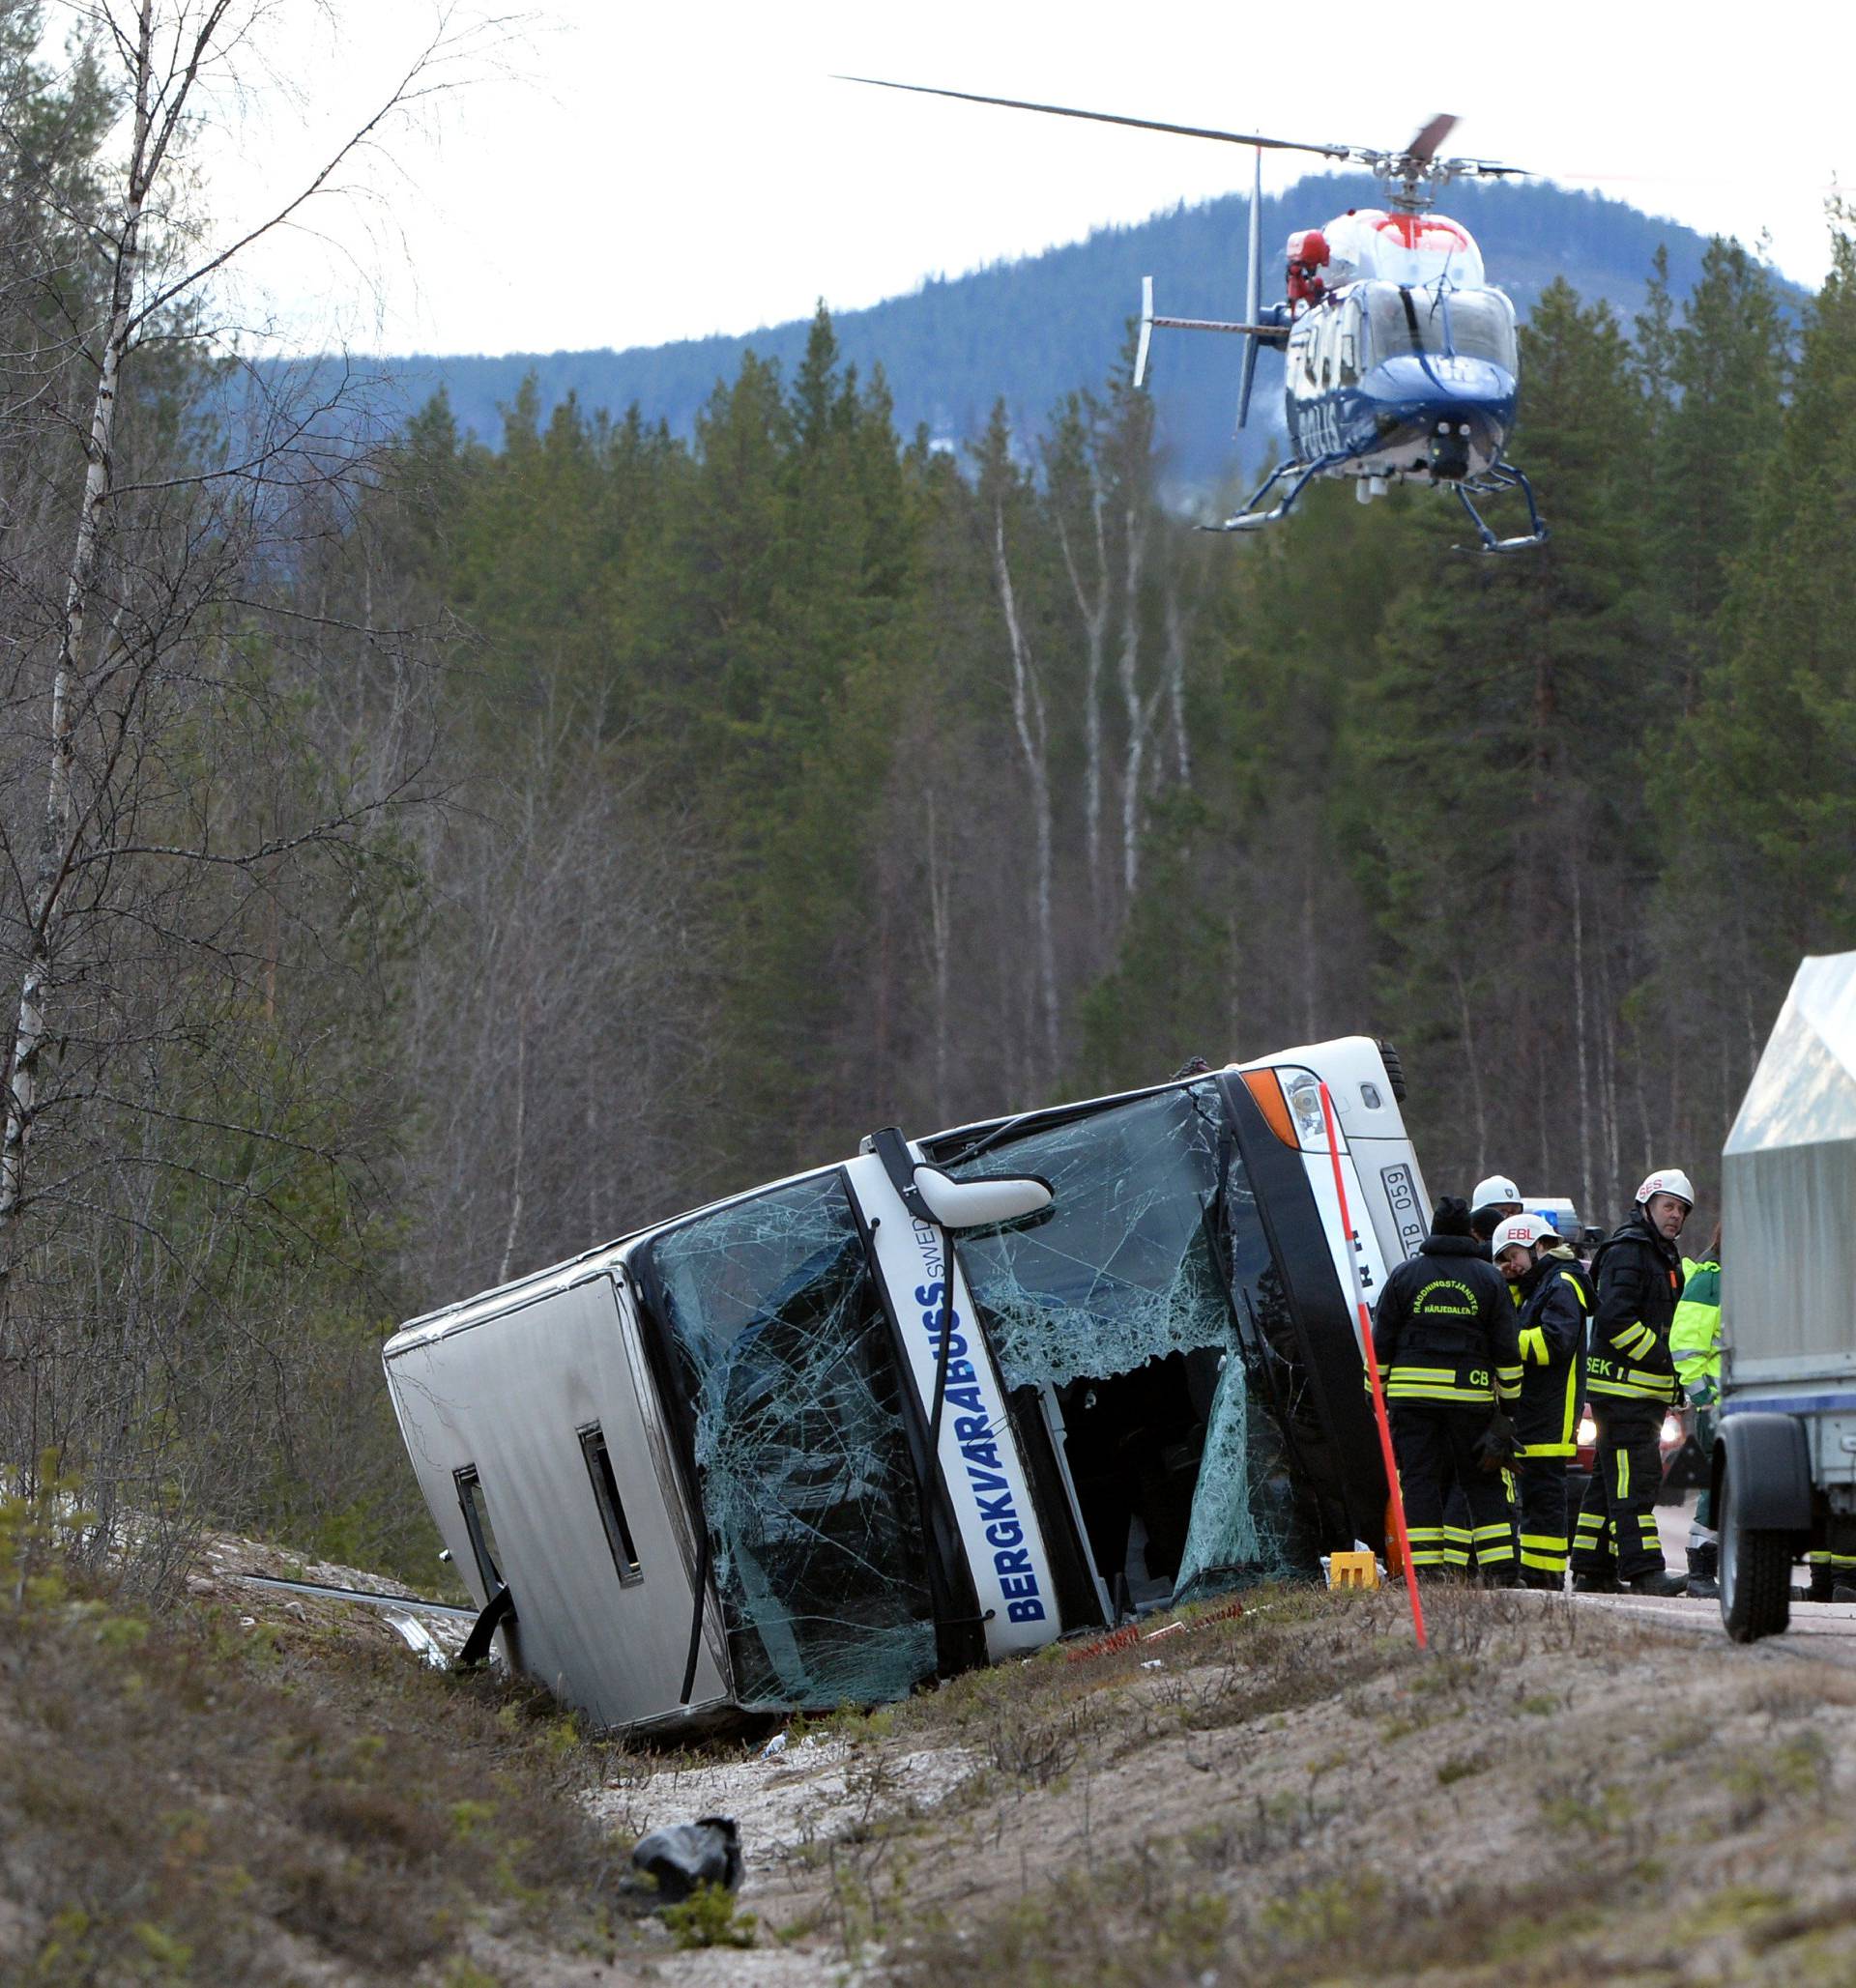 Rescue workers are seen at the site where a bus carrying school children and adults rolled over on a road close to the town of Sveg